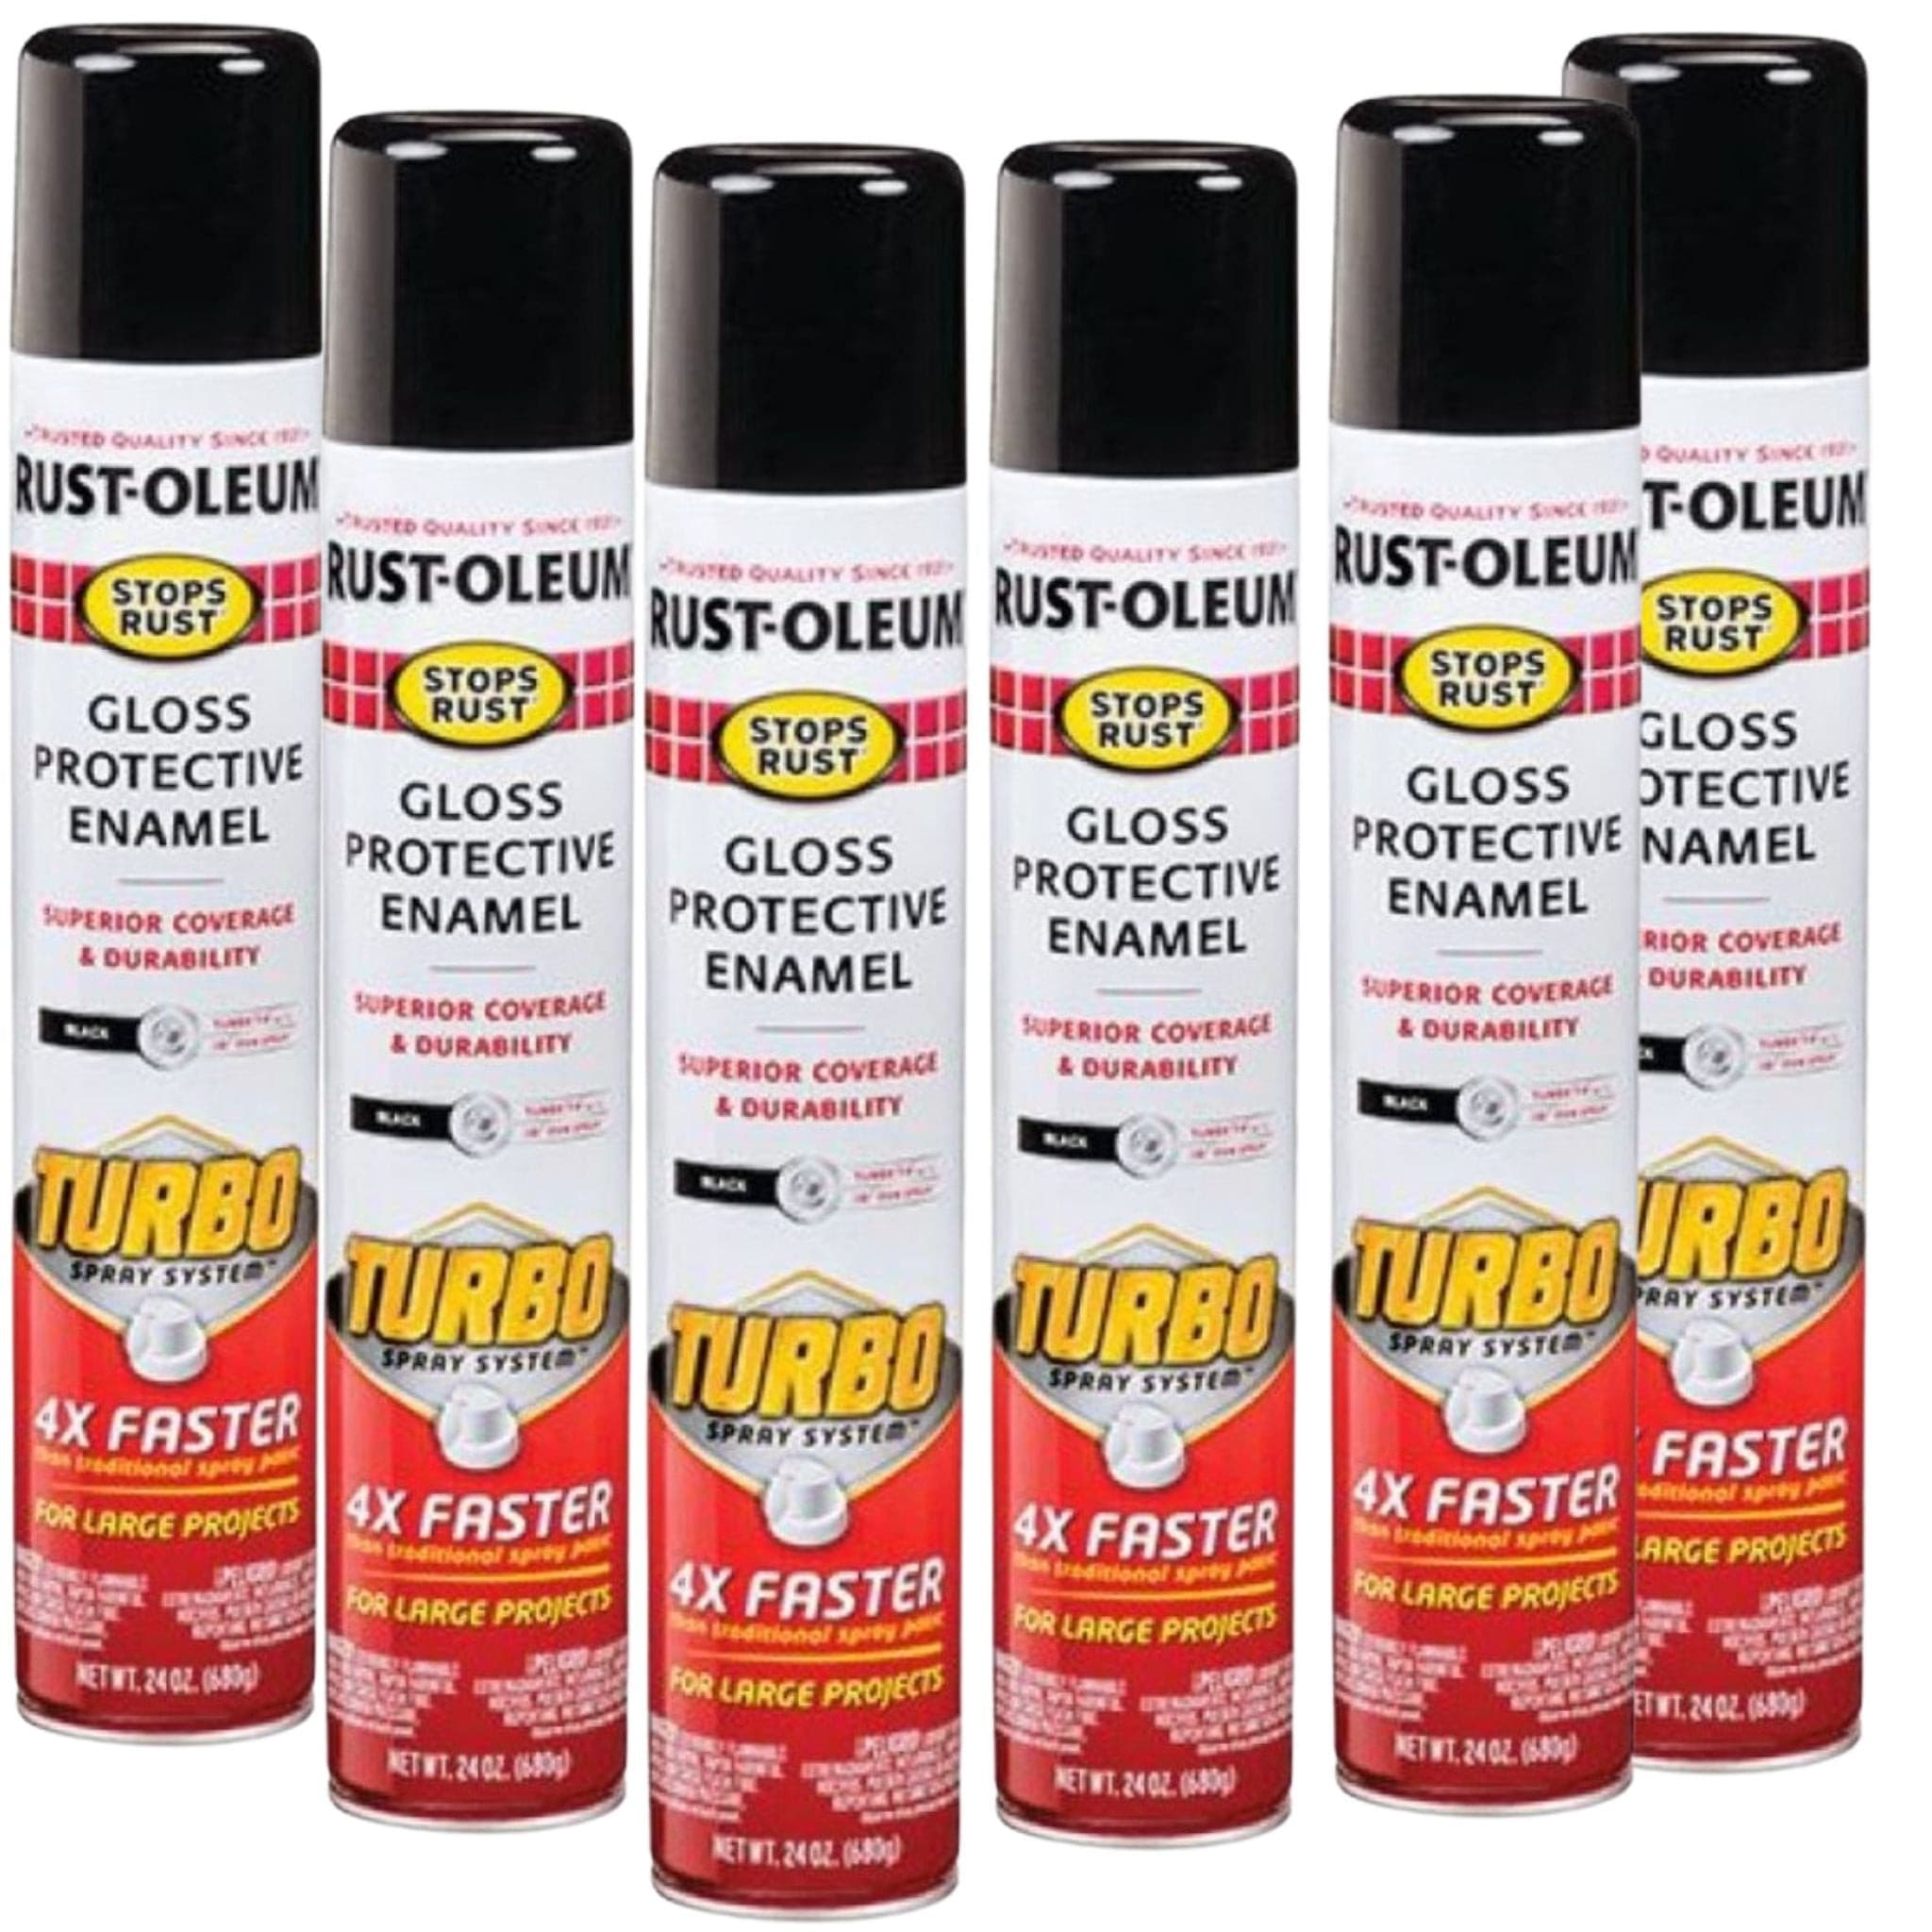 6 Cans) - Rust-Oleum Gloss Protective Enamel With Turbo Spray System  Rustoleum - Black